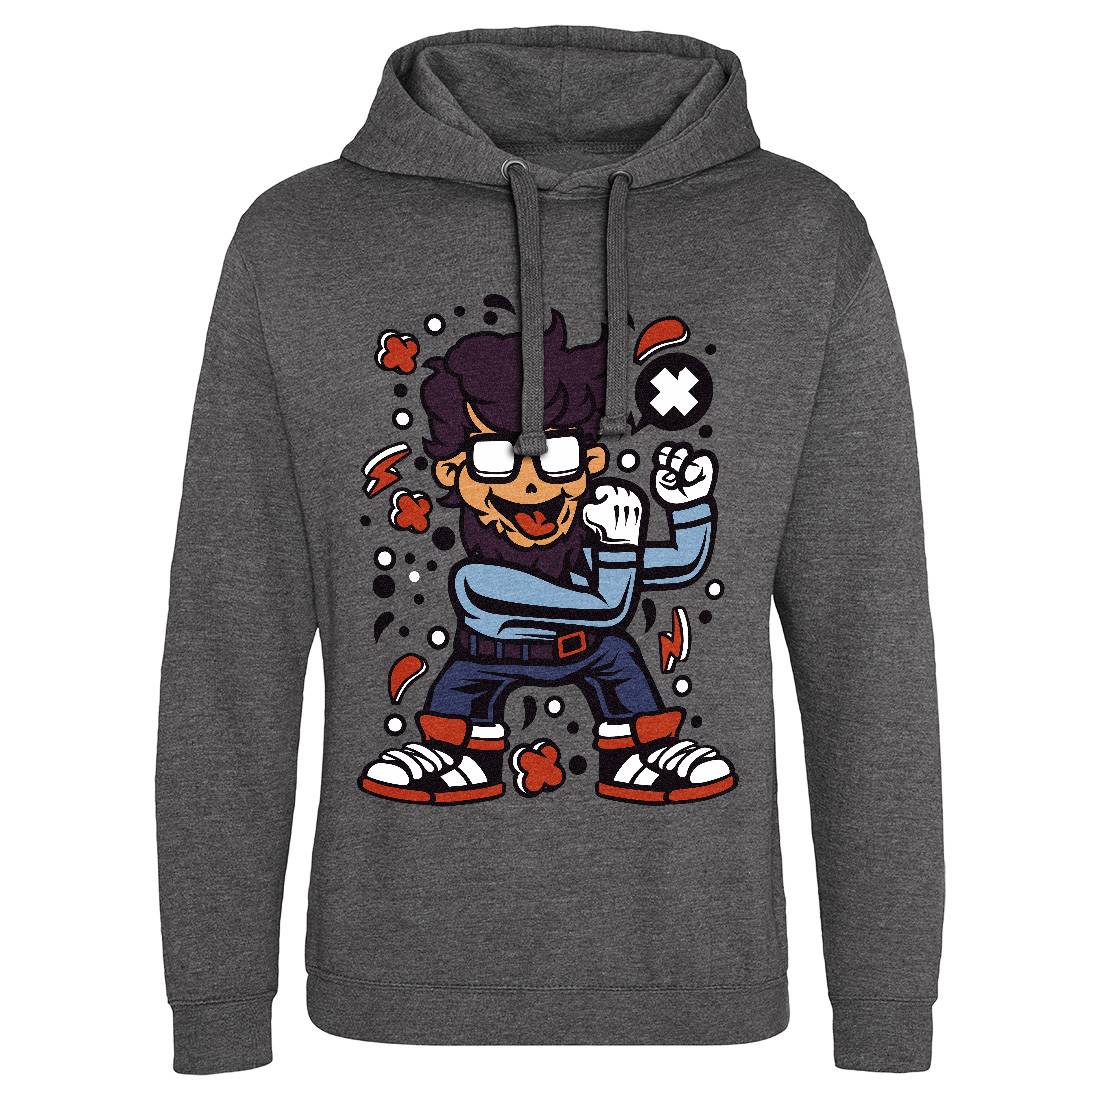 Hipster Fighter Mens Hoodie Without Pocket Sport C560